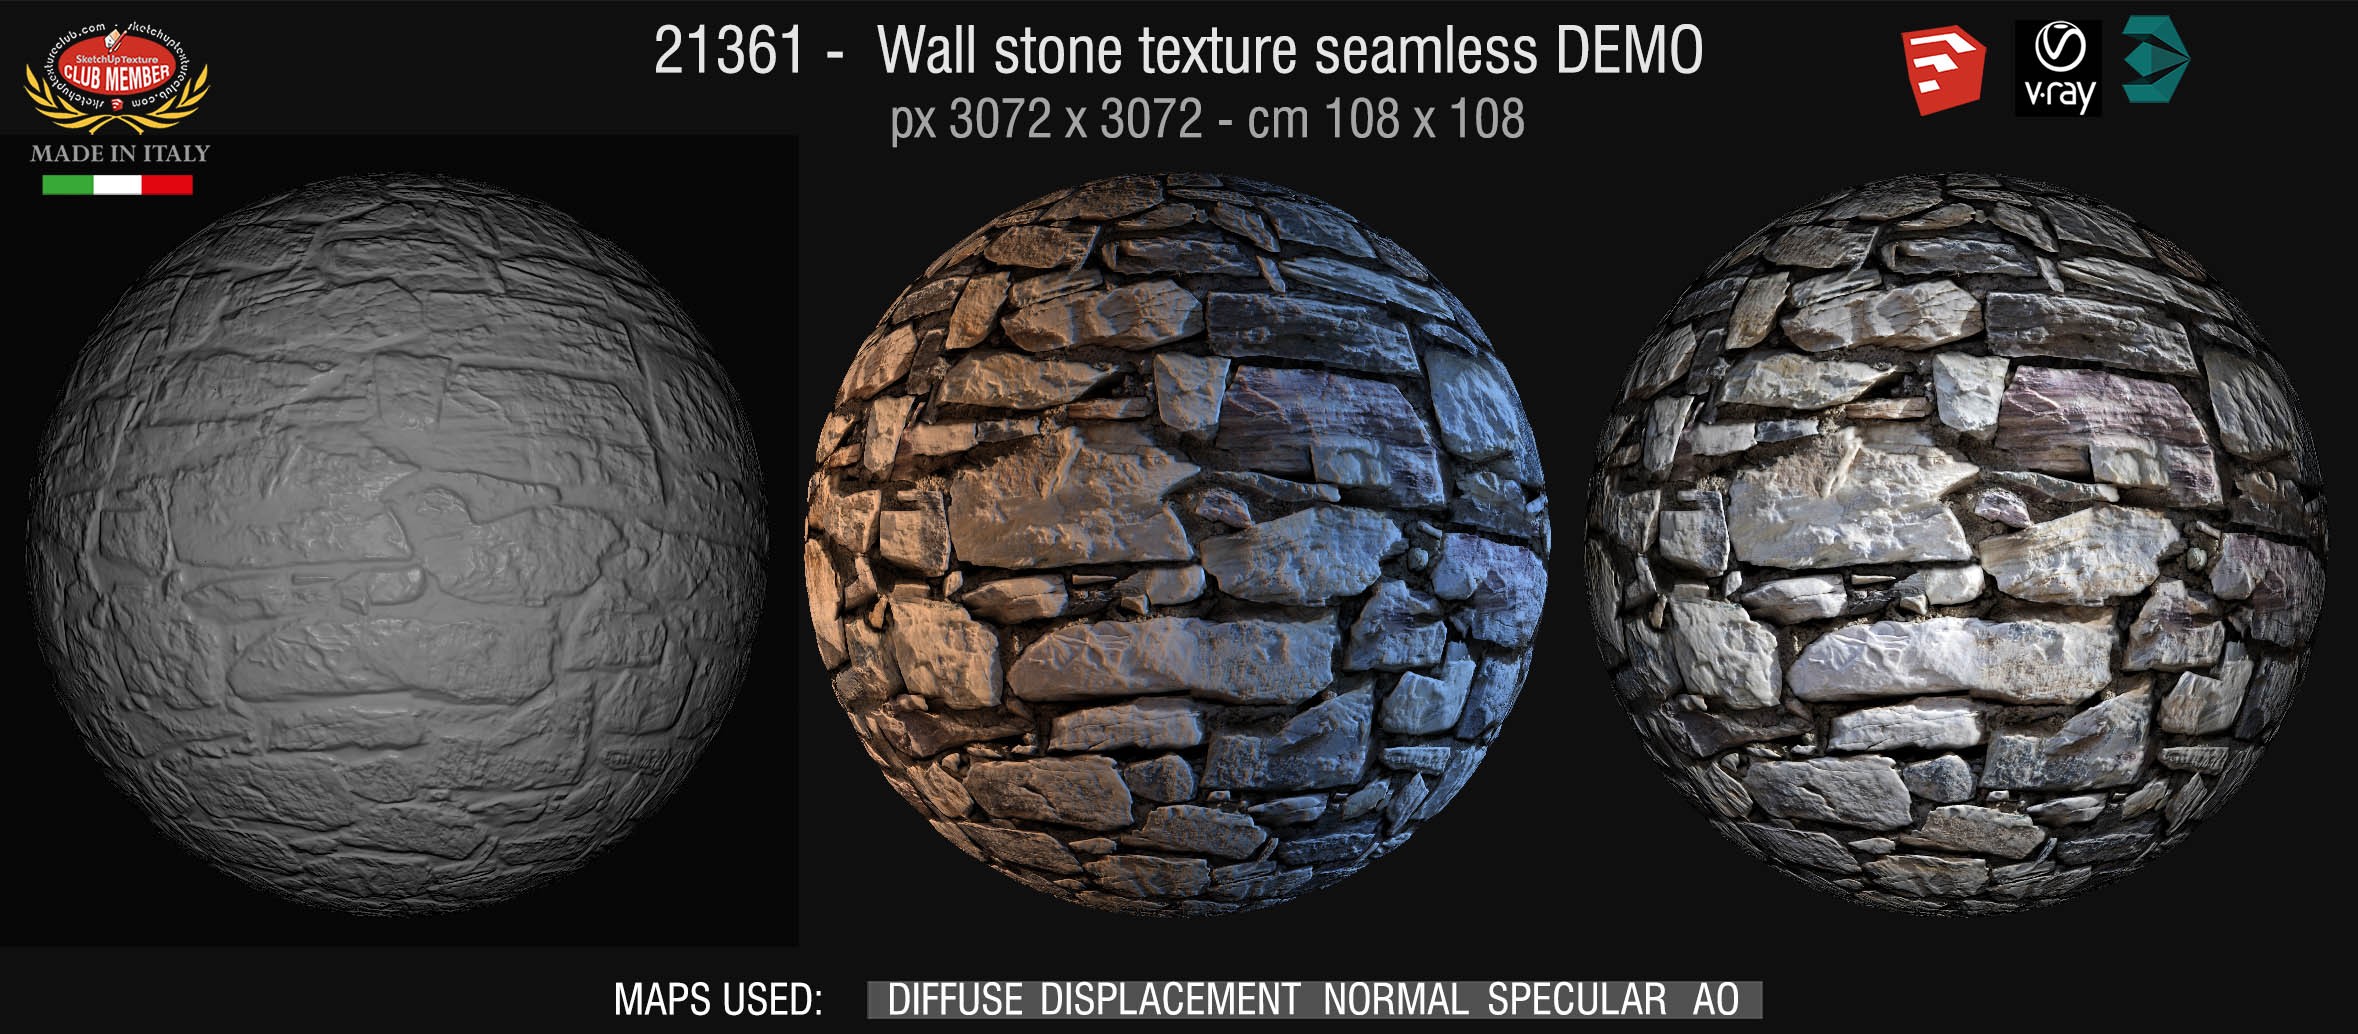 21361 HR wall stone texture seamless + maps demo